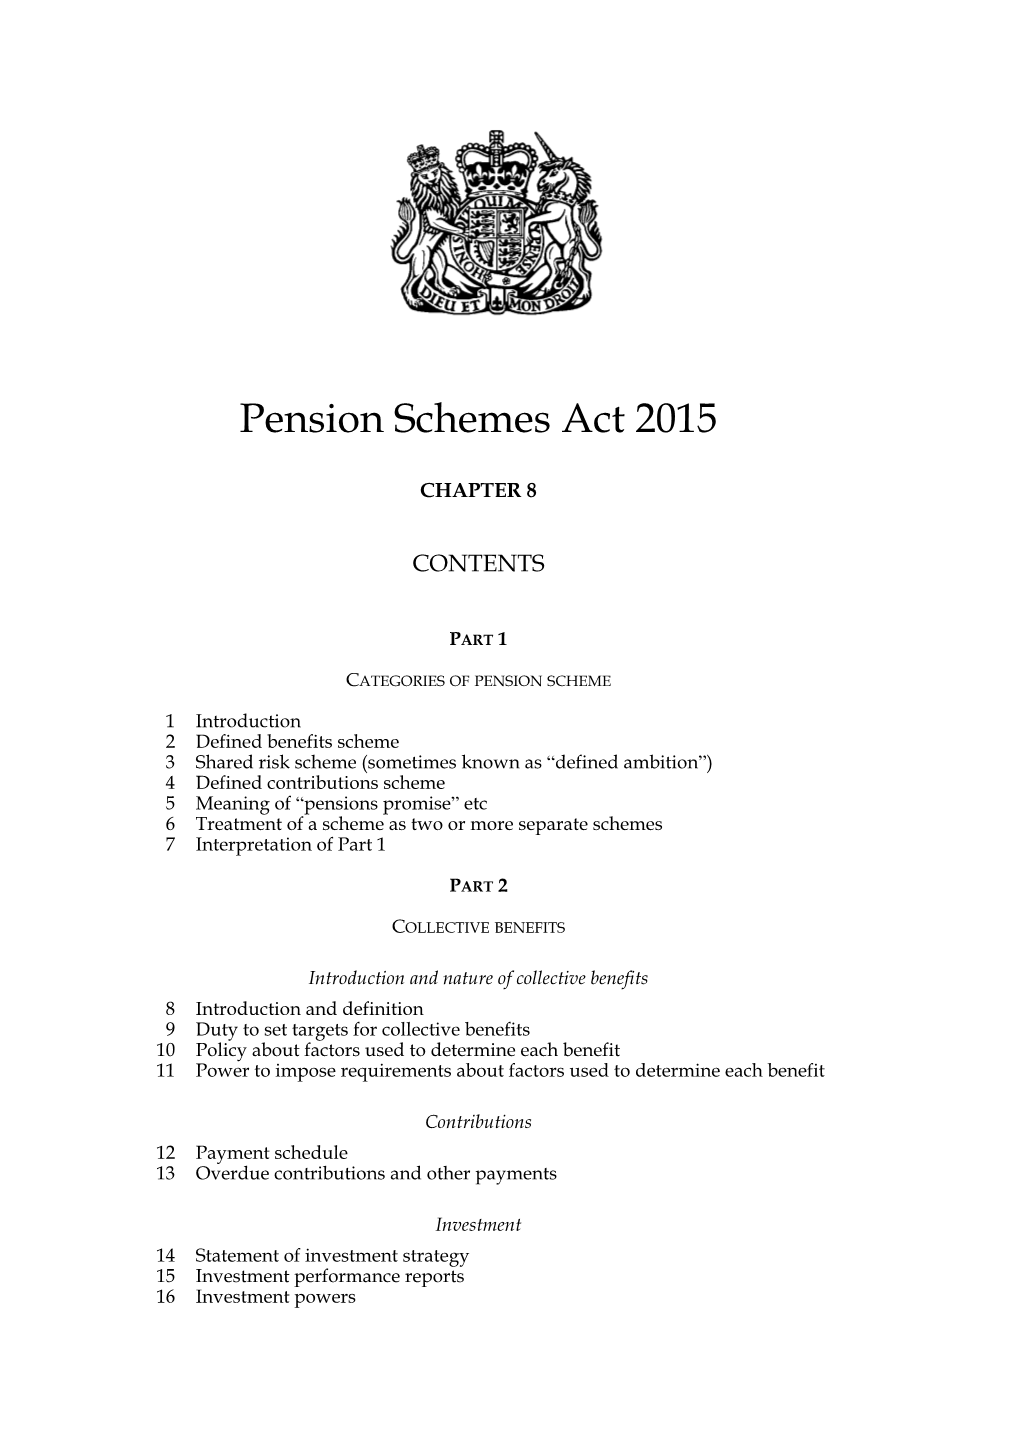 Pension Schemes Act 2015